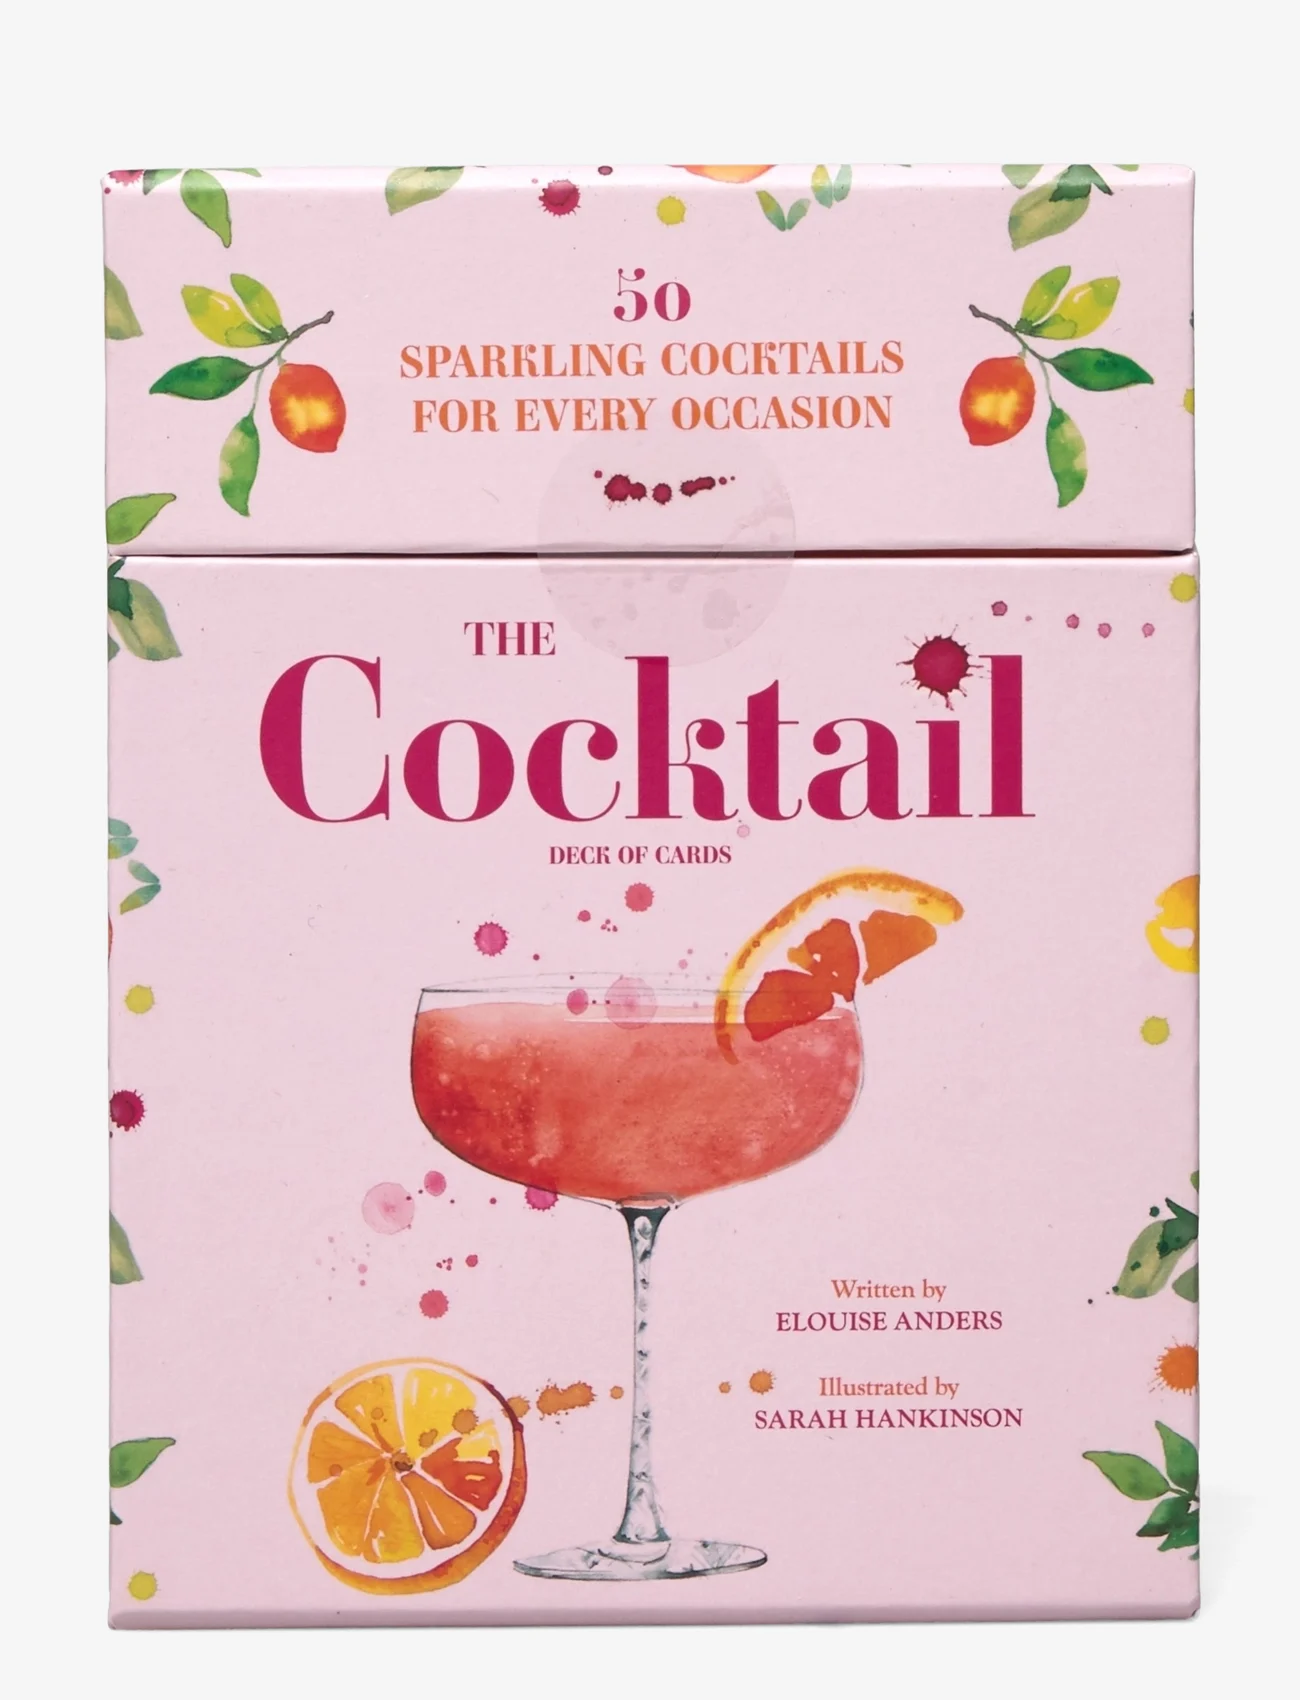 New Mags - The Cocktail Deck of Cards - lägsta priserna - pink - 0